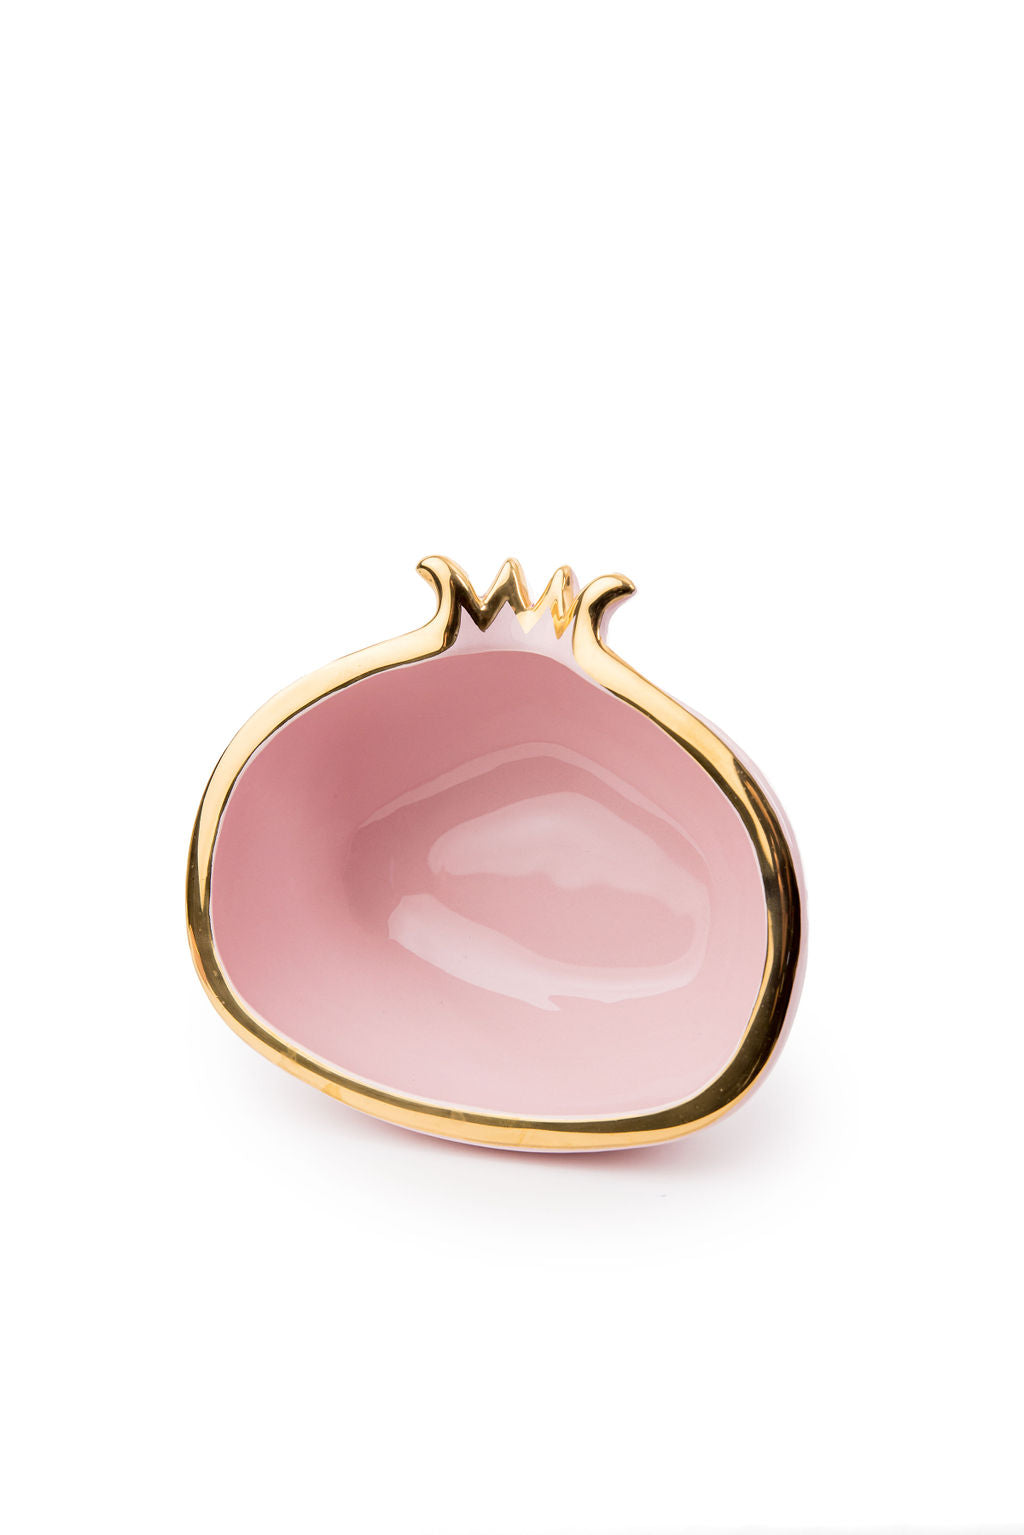 Pink Pomegranate Bowls With Gold Edge